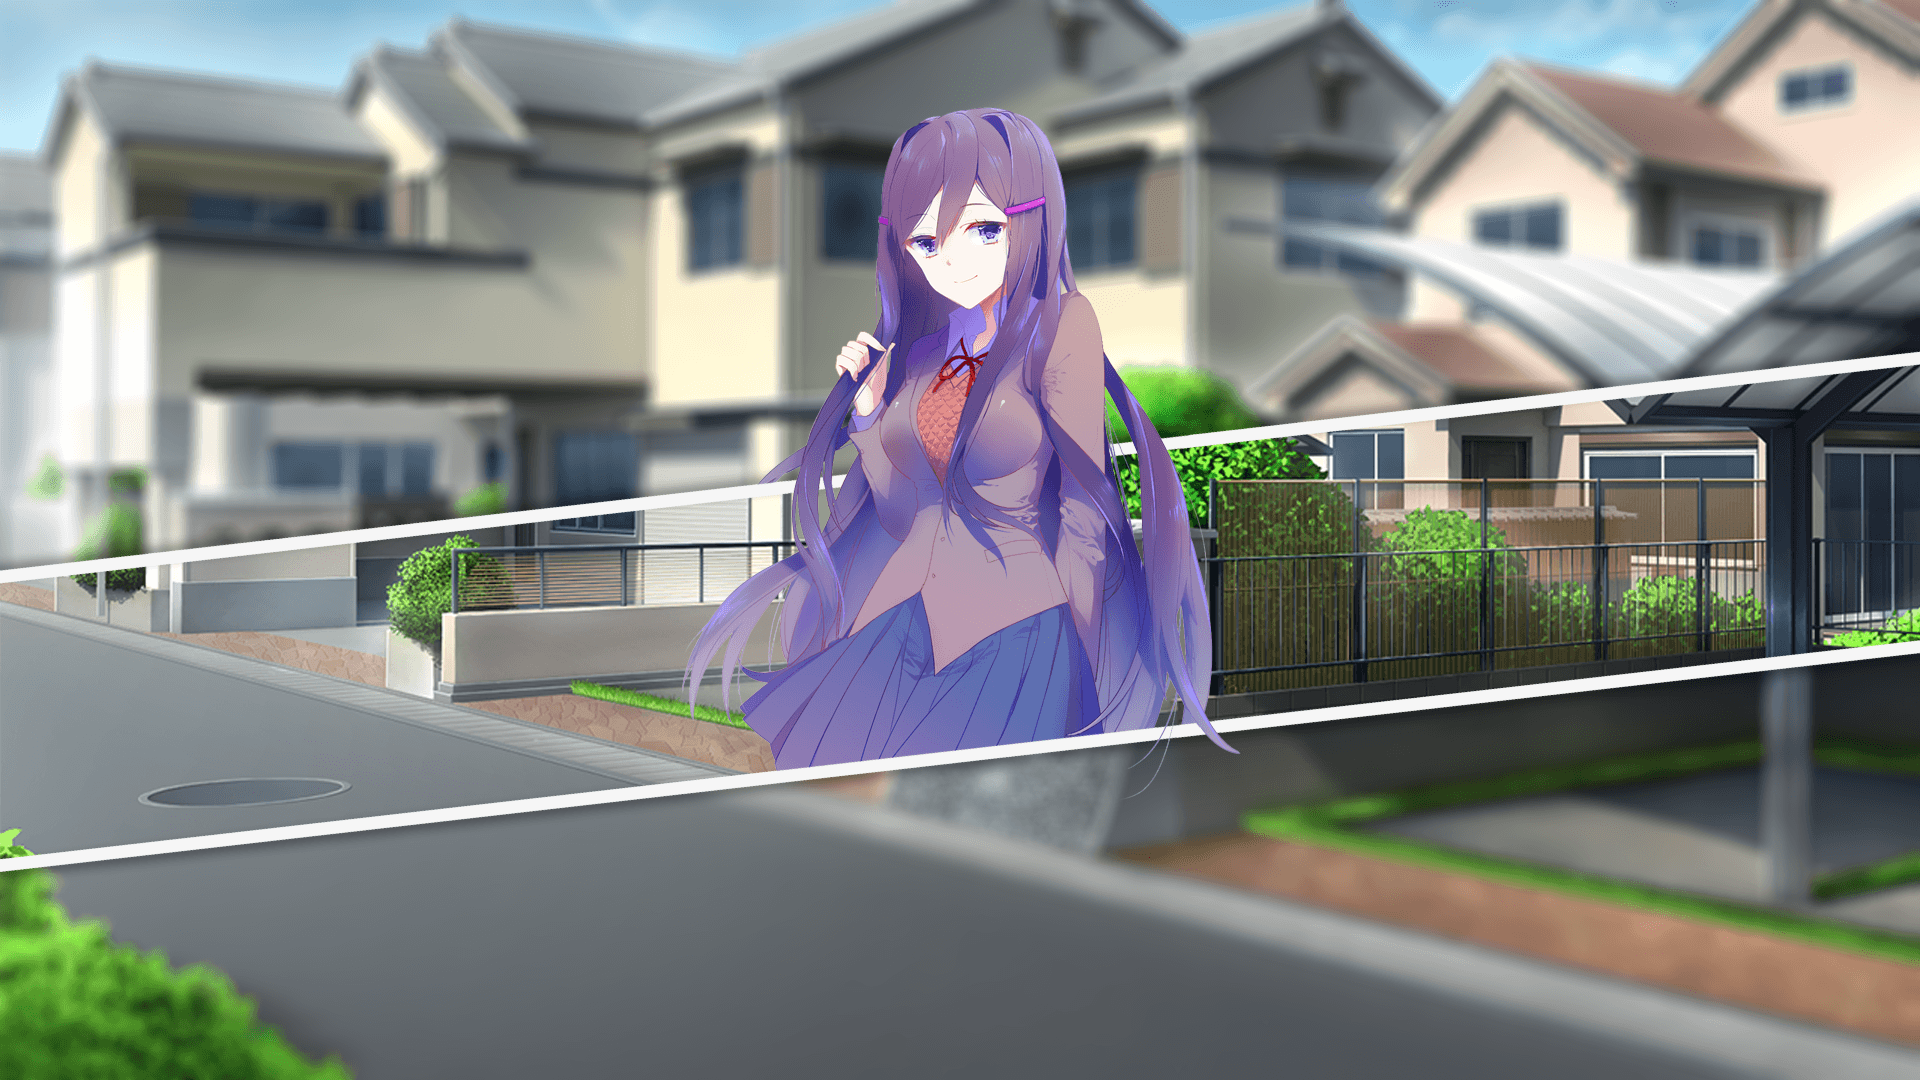 A new wallpaper, this time it's Yuri!